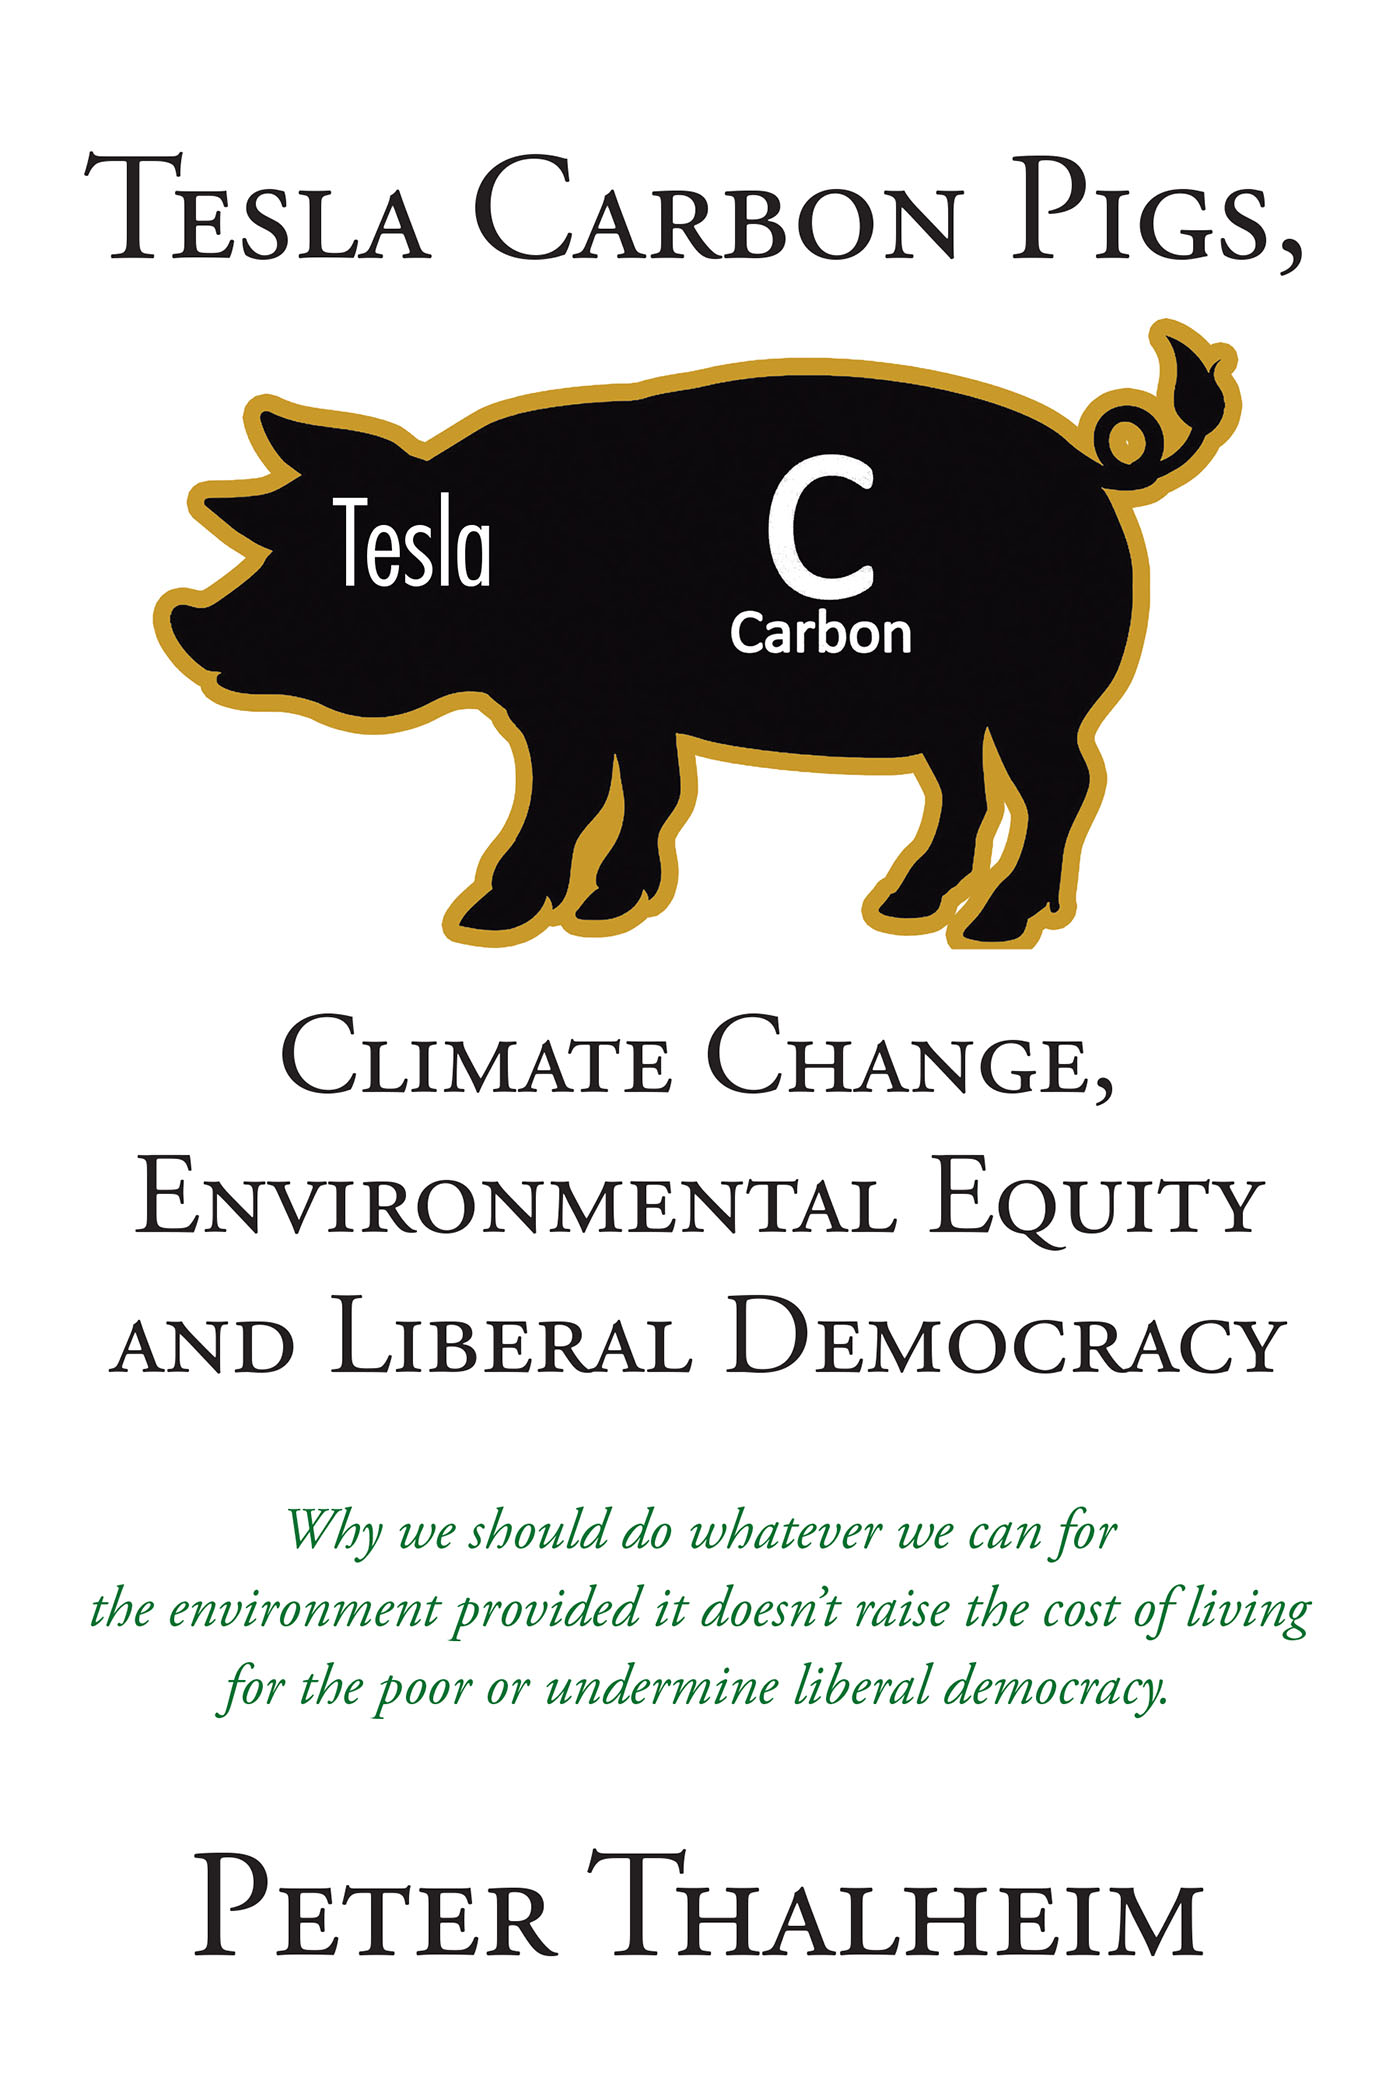 Peter Thalheim’s New Book “Tesla Carbon Pigs, Climate Change, Environmental Equity and Liberal Democracy" Presents a Thoughtful Approach to Addressing the Climate Crisis